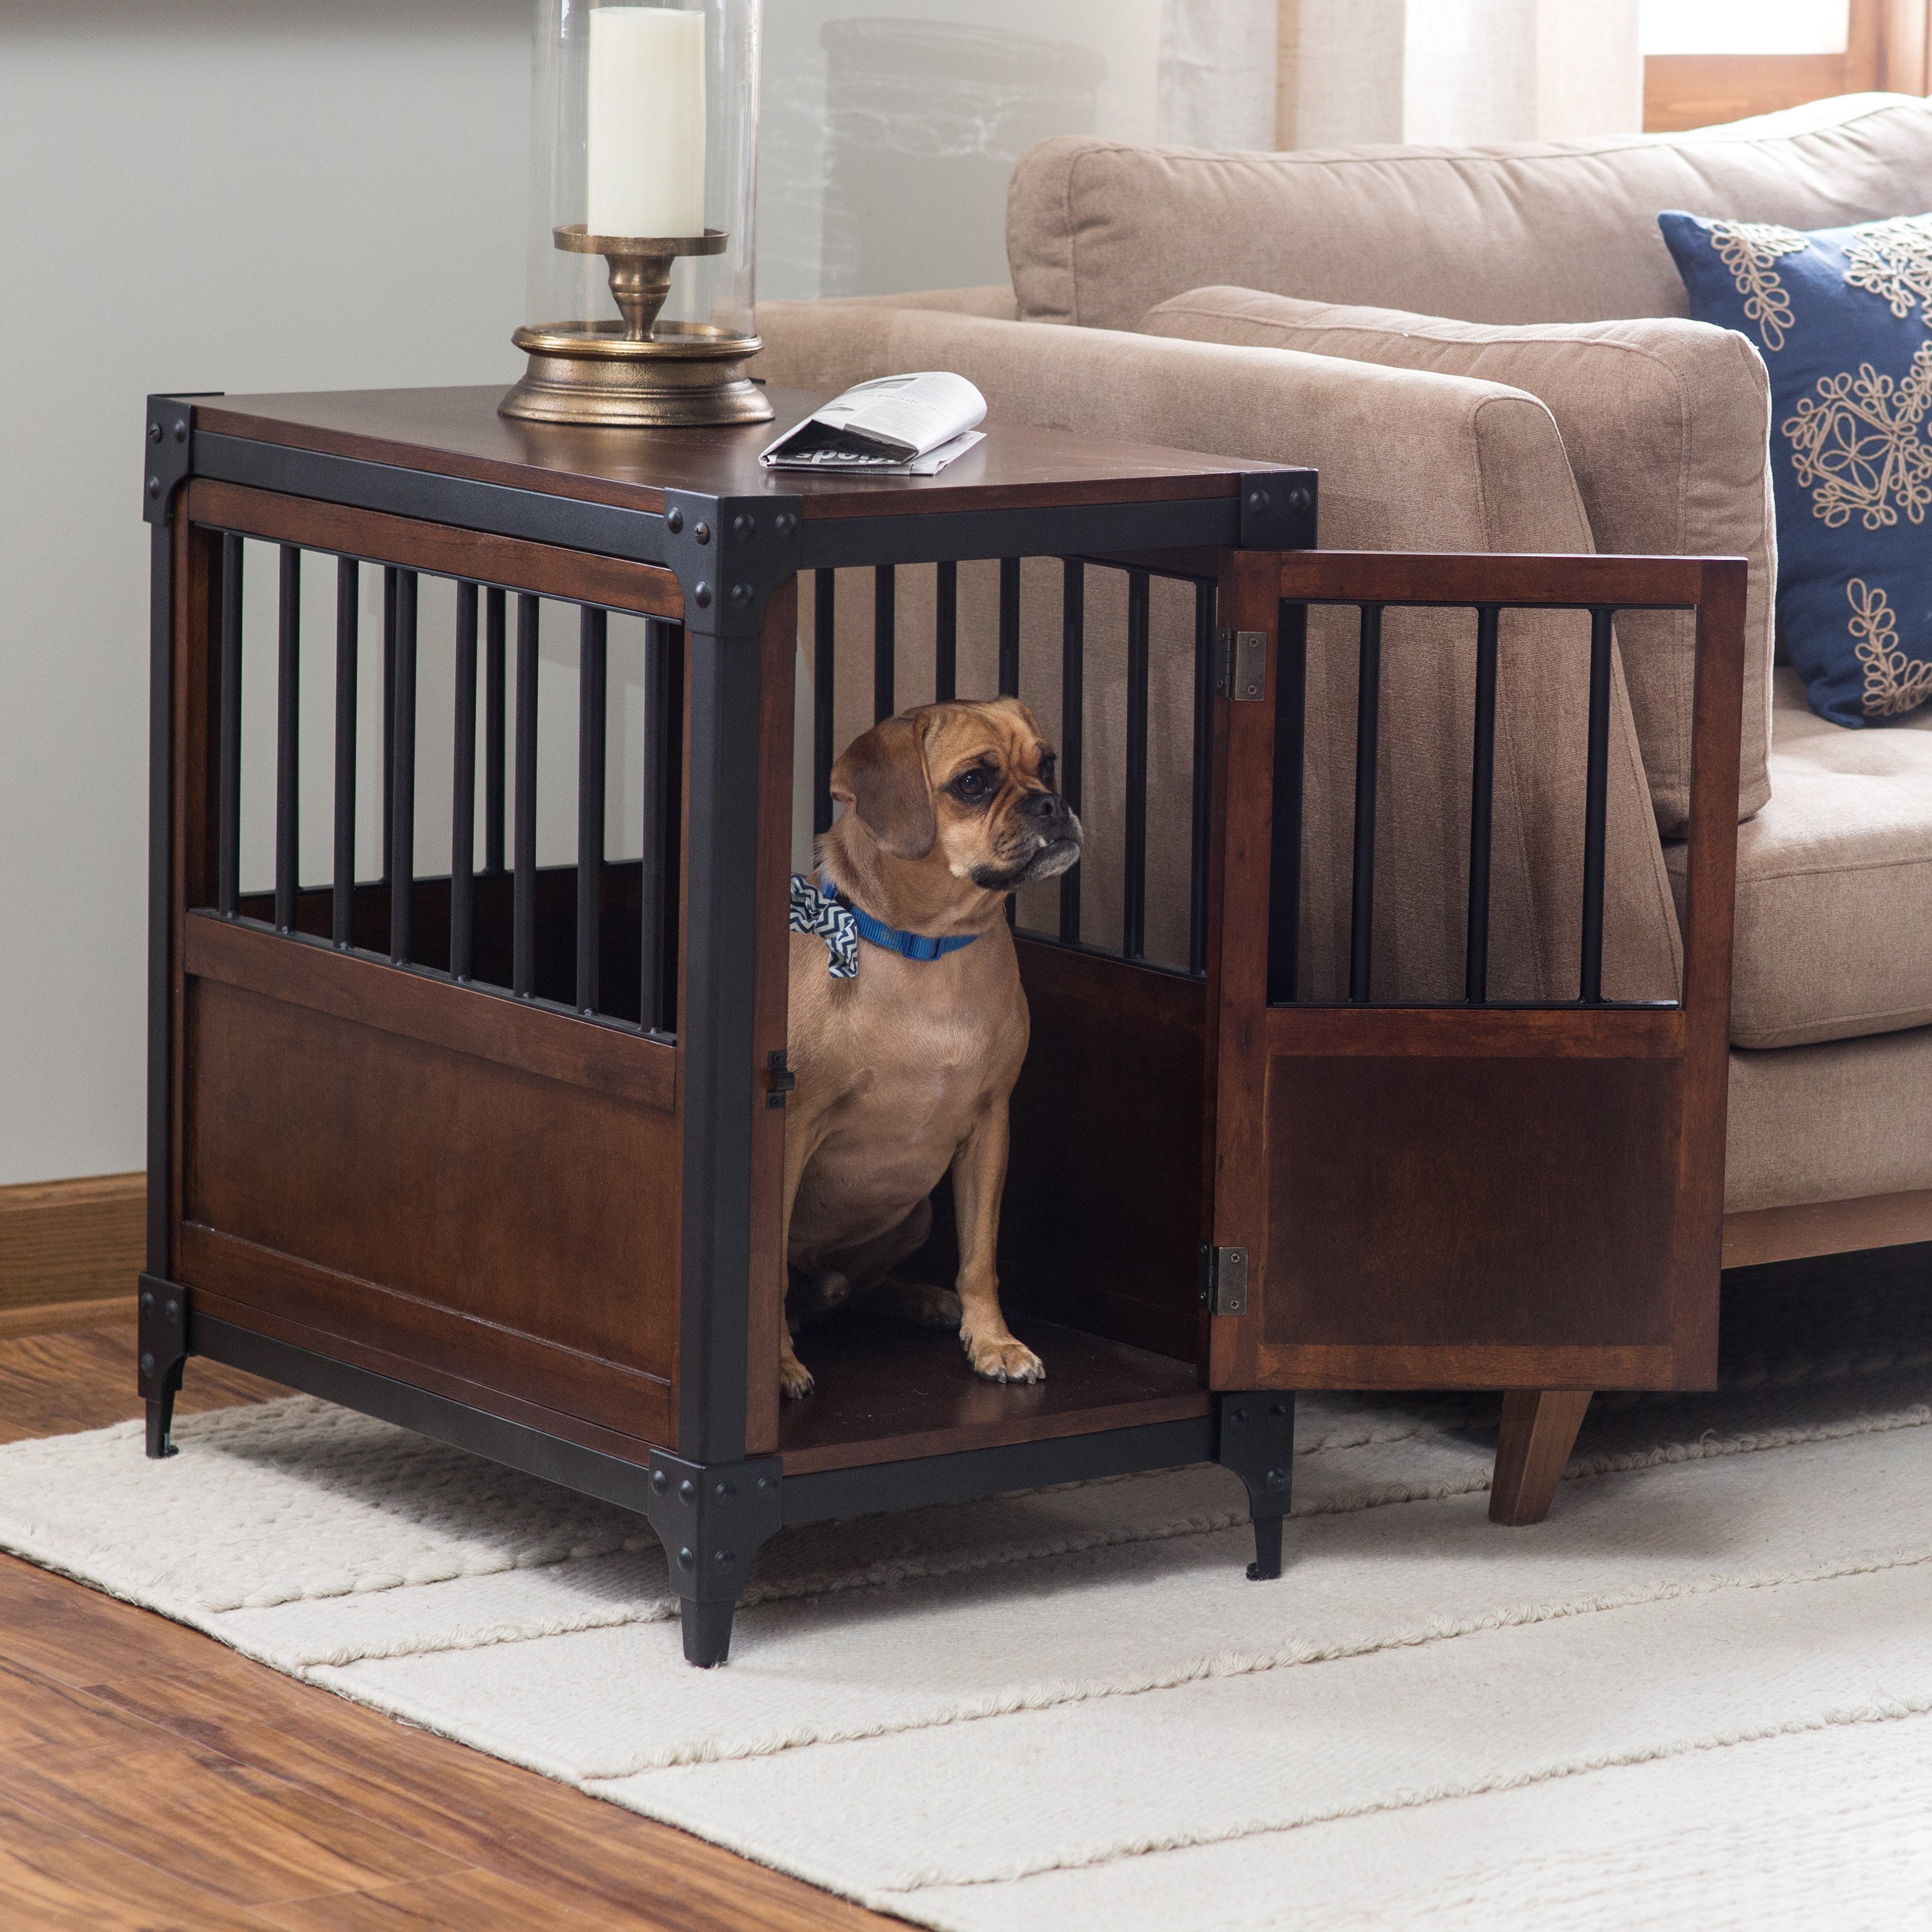 best types crates for dog training whole journal that look like end tables boomer george trenton pet crate table inch wide modern contemporary glass coffee lift off what black